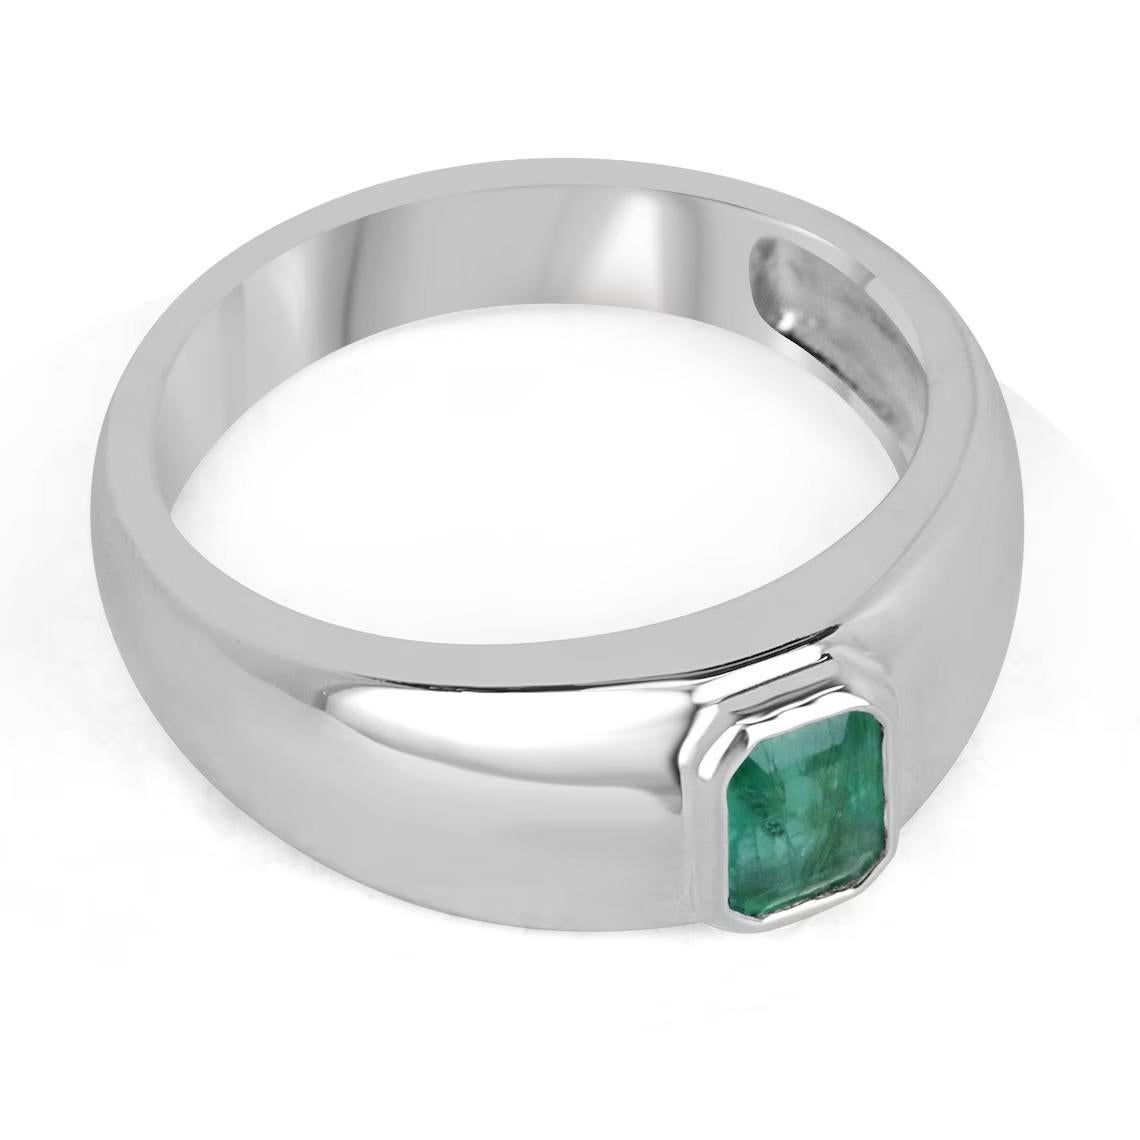 A stunning natural emerald solitaire ring. This beauty features a gorgeous emerald cut emerald that is under a carat yet displays a ravishing medium-dark green color with remarkable qualities. Set vertically in a sterling silver bezel